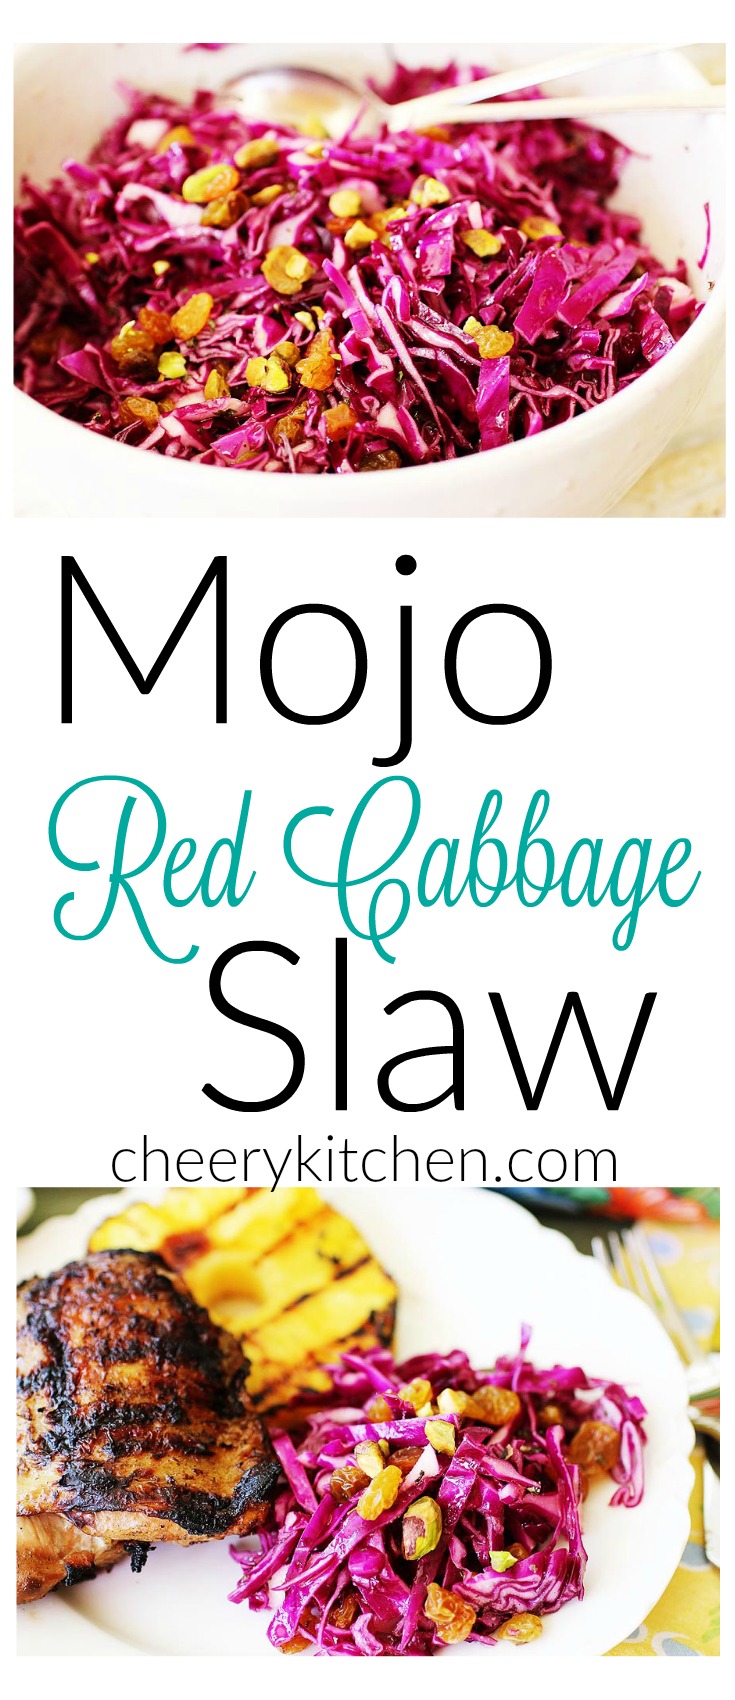 Latin inspired, fresh, crunchy, healthy, and colorful, Mojo Red Cabbage Slaw is a great side dish for all of your summer parties and picnics.